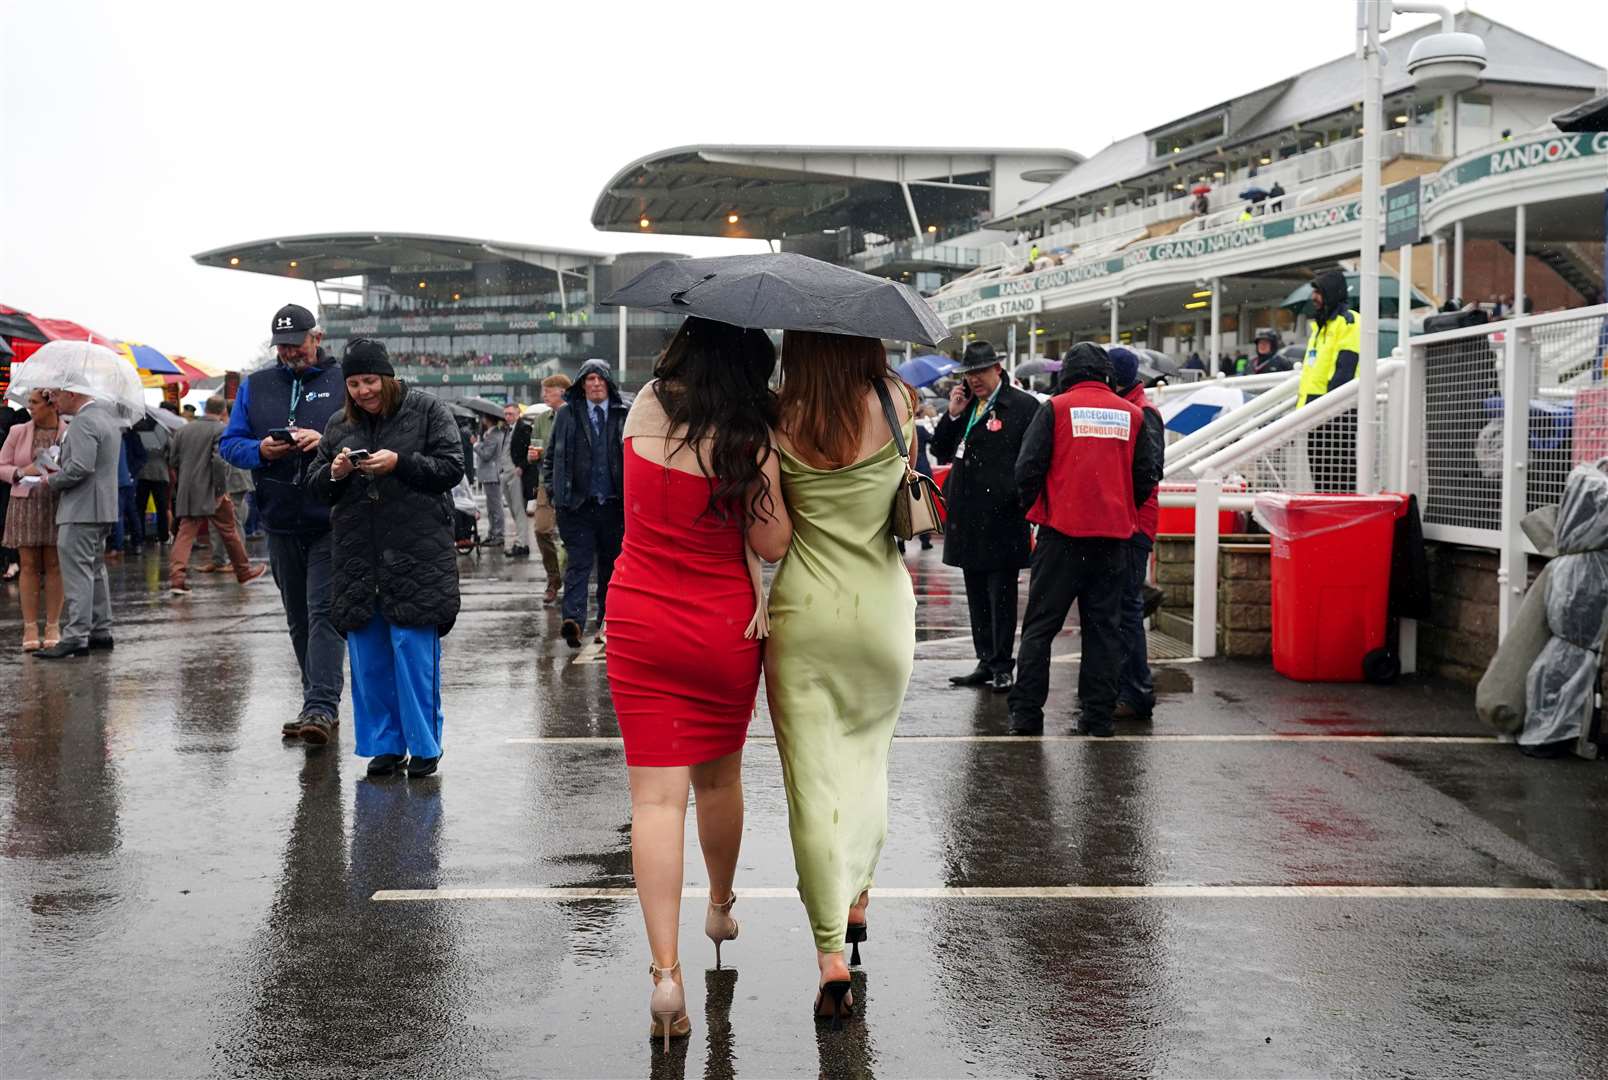 Umbrellas were a must-have addition to many outfits on the day (David Davies for The Jockey Club/PA)